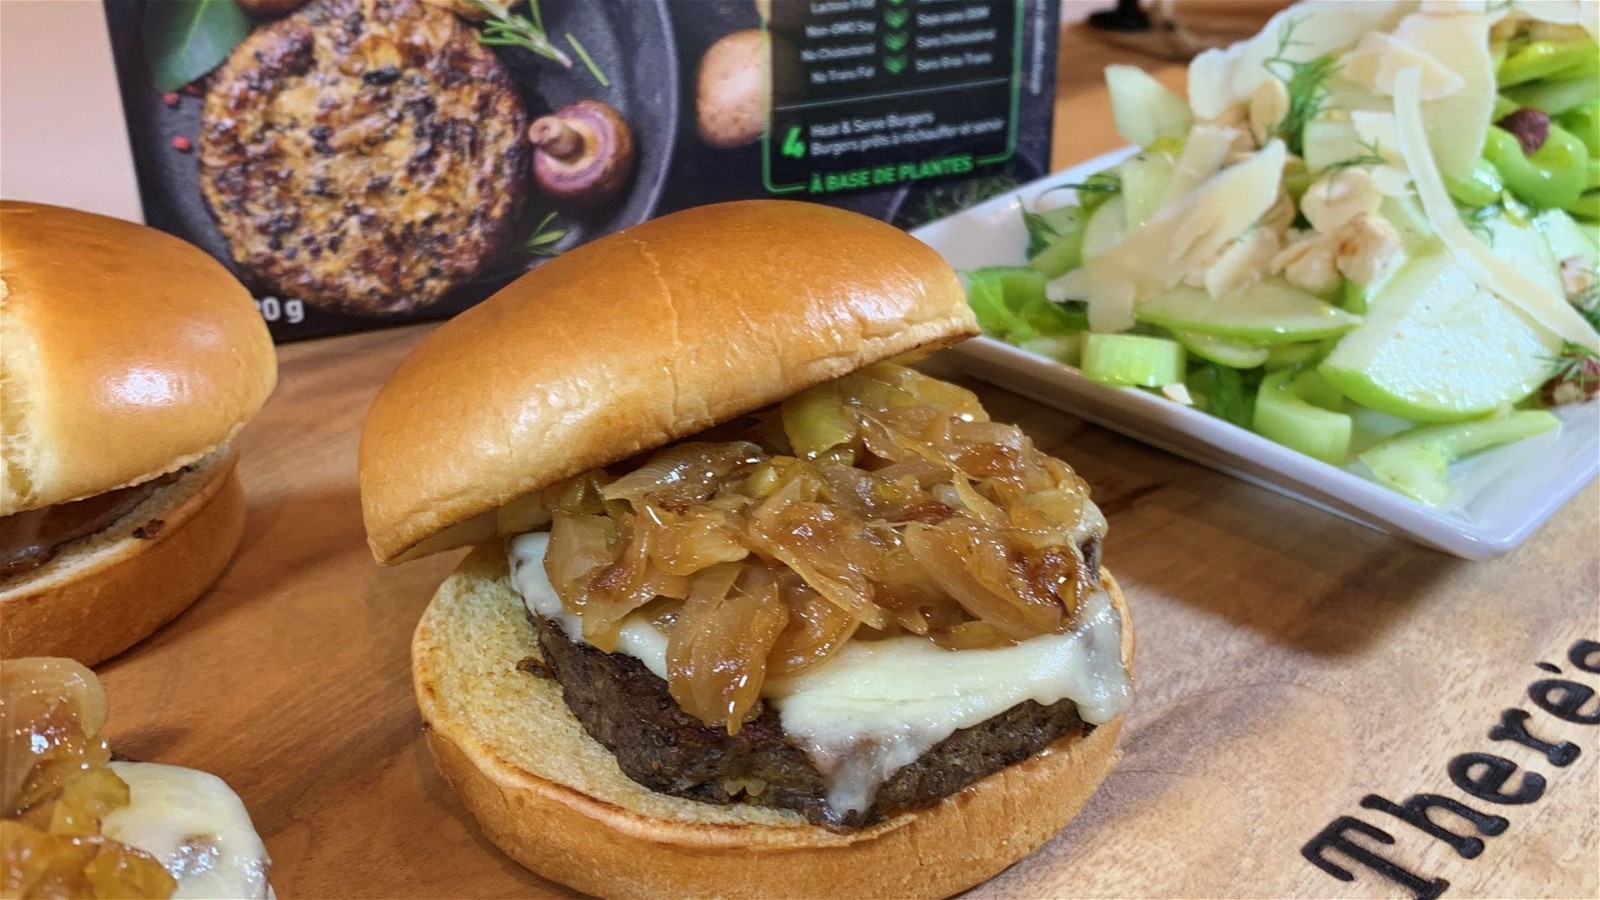 Image of Mushroom Burger with Caramelized Onions and Celery Salad